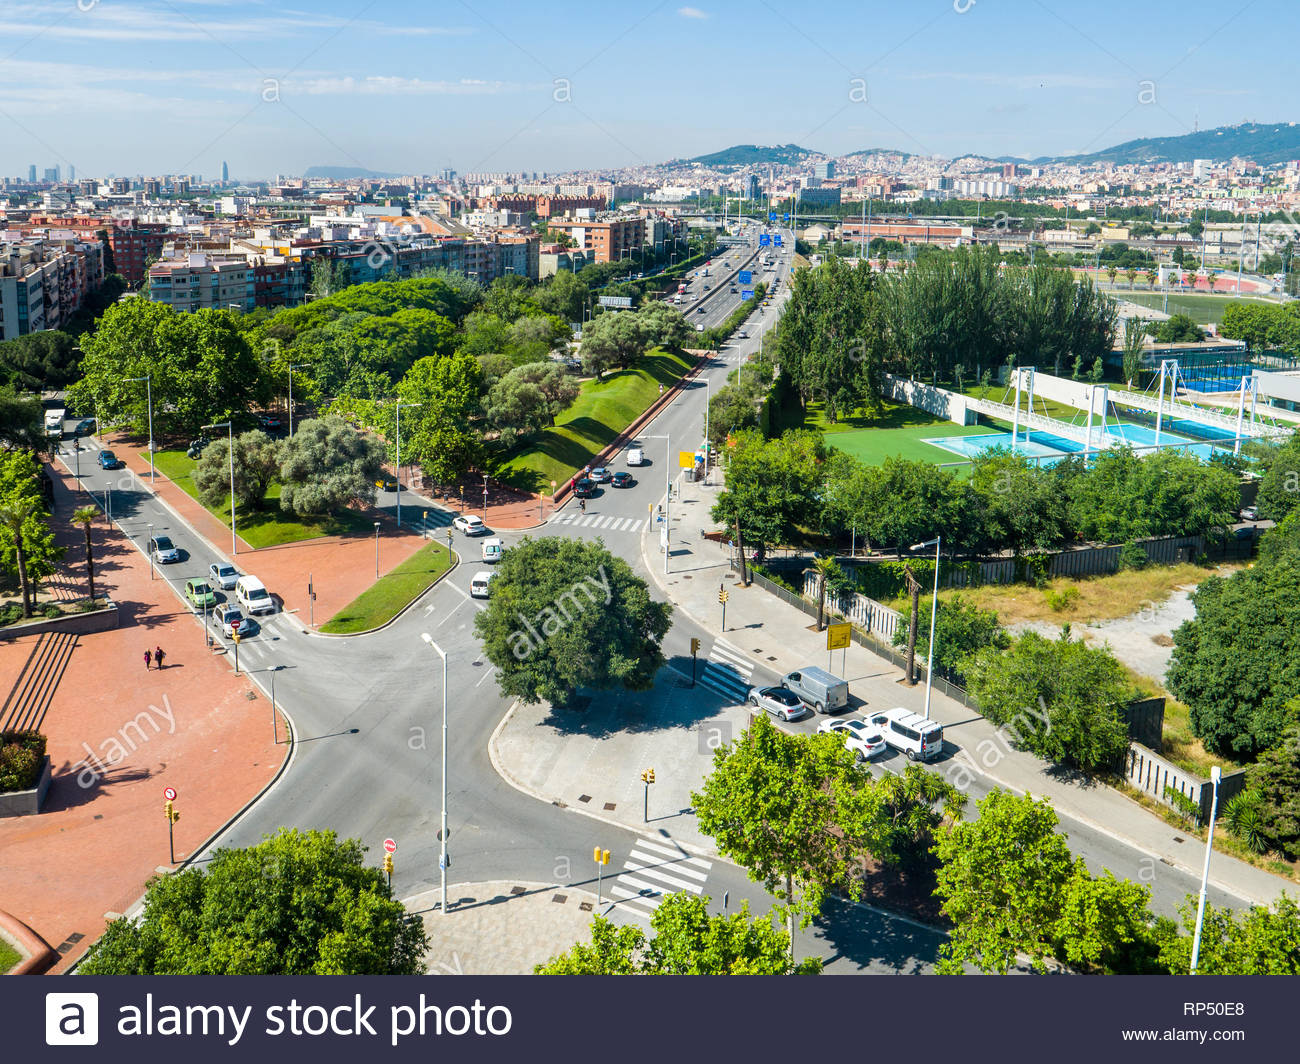 Aerial Of Barcelona Spain With Highway And City In Background